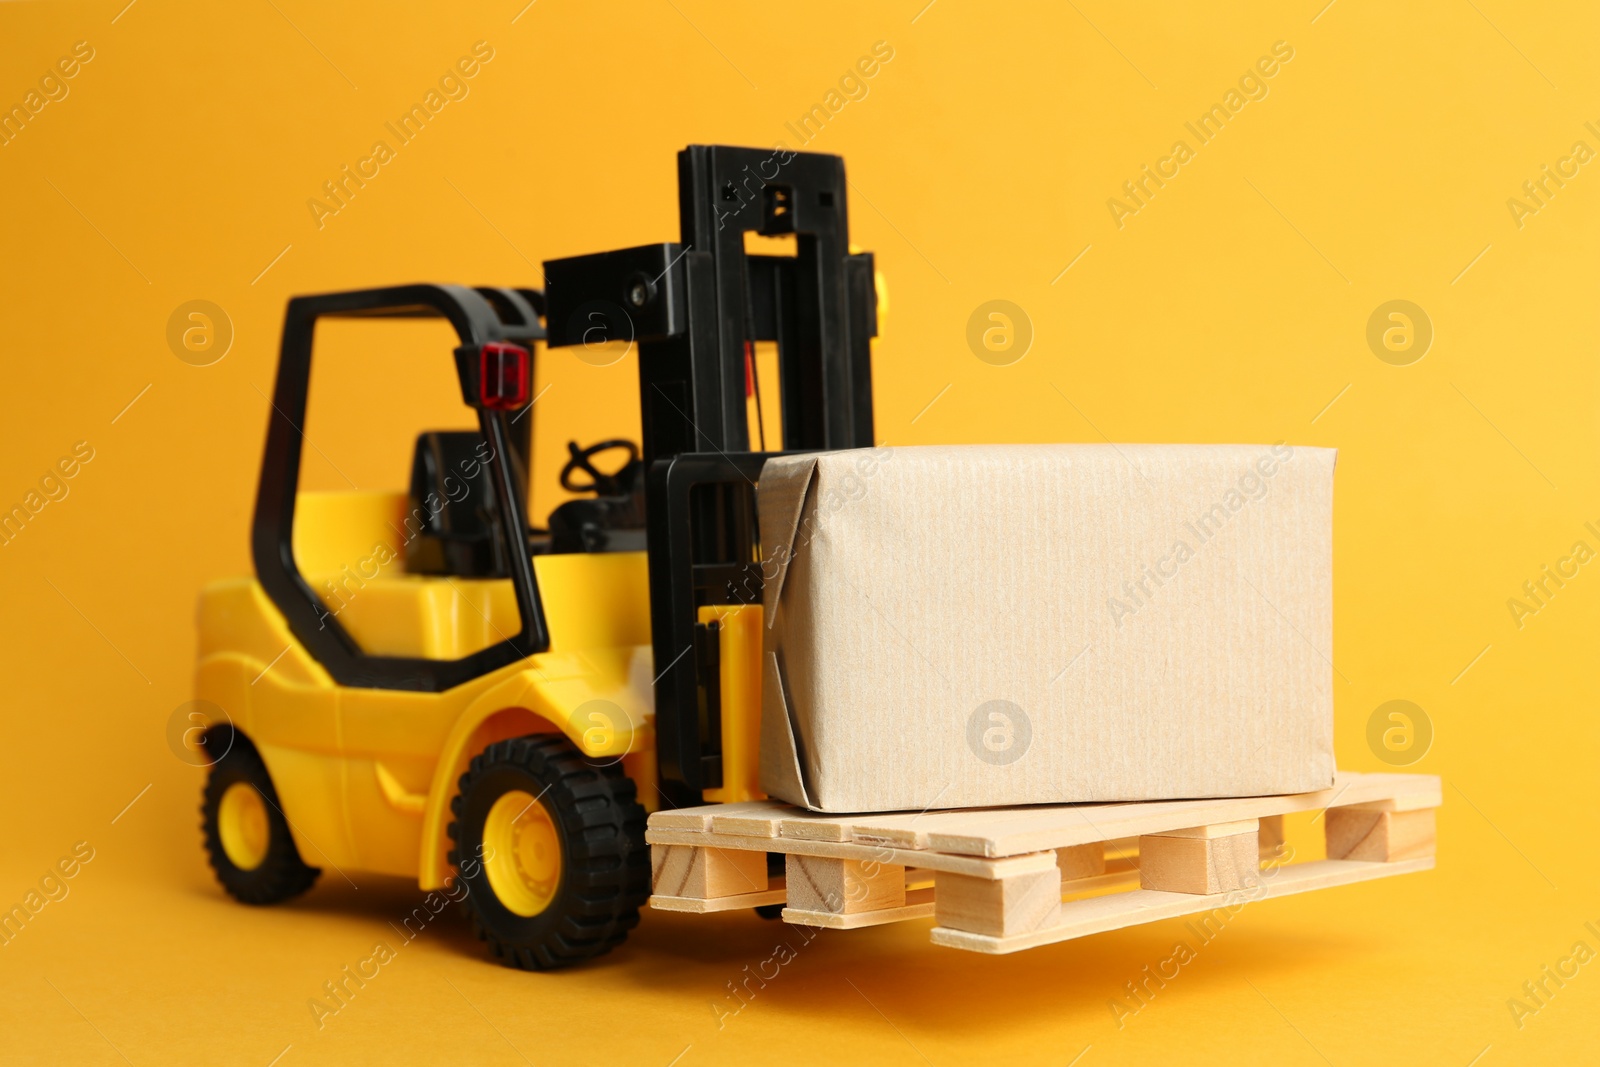 Photo of Toy forklift with wooden pallet and box on orange background